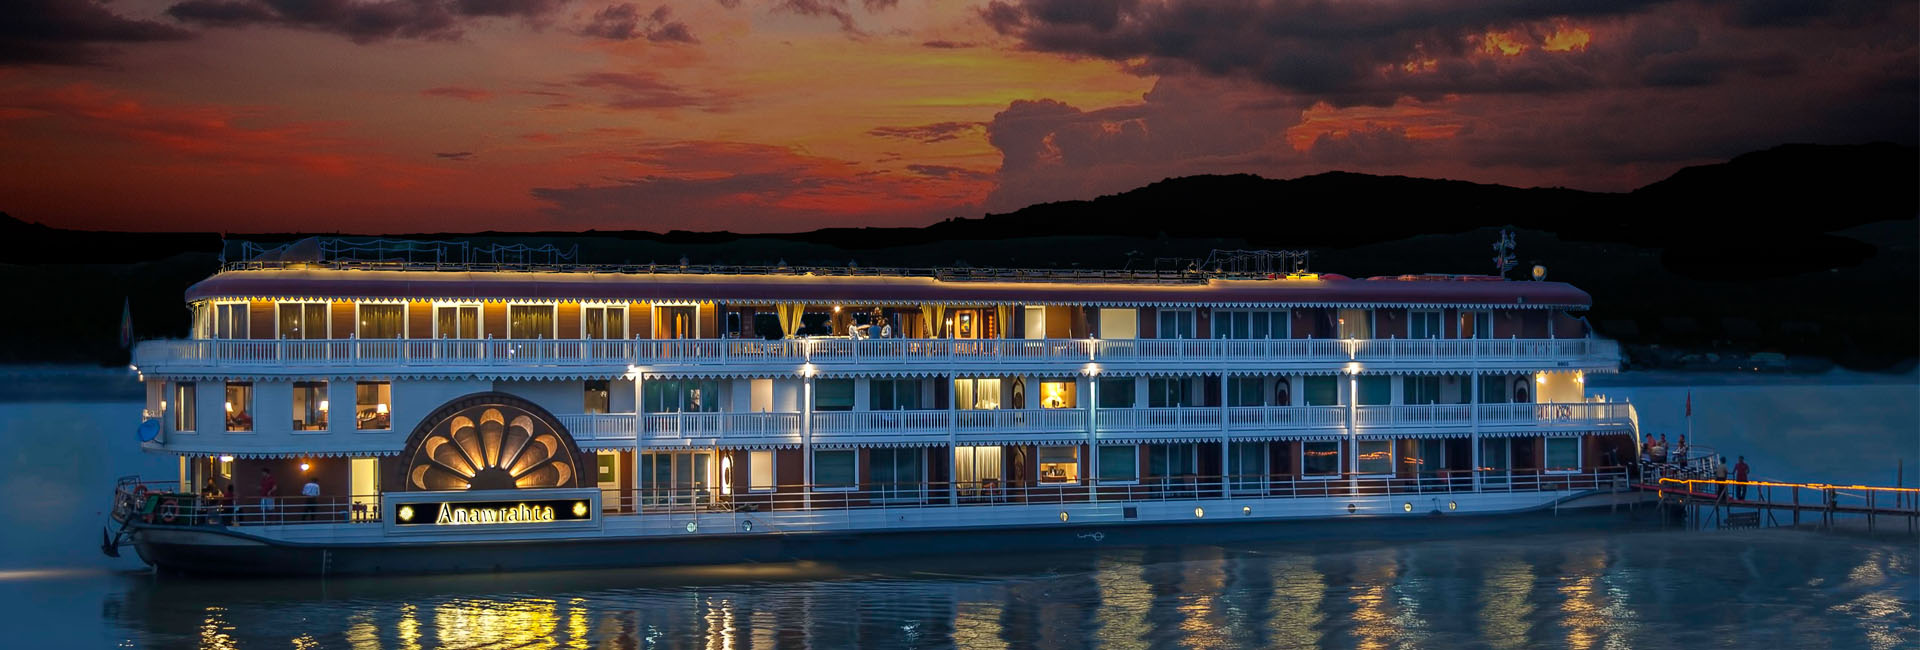 luxury mekong river cruise reviews